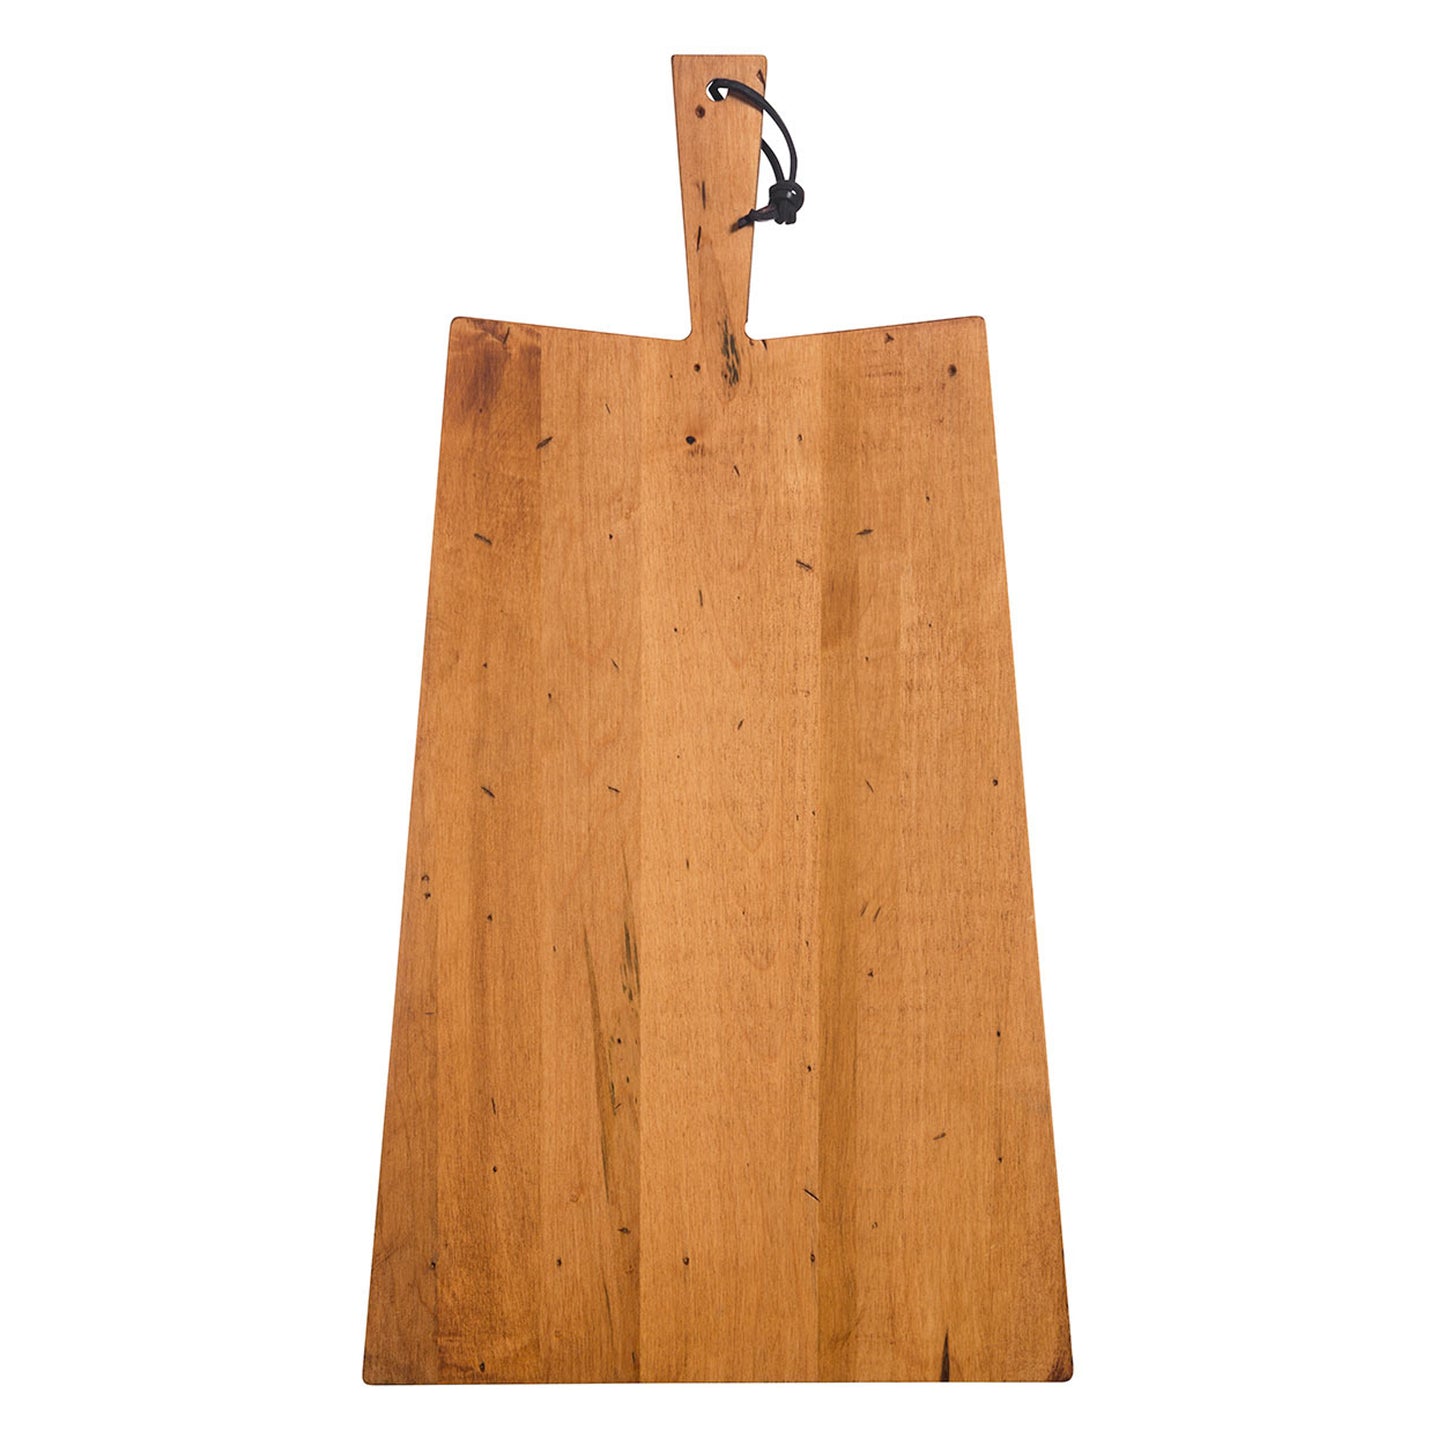 Artisan Maple Paddle Handled Serving Board-21" x 11"